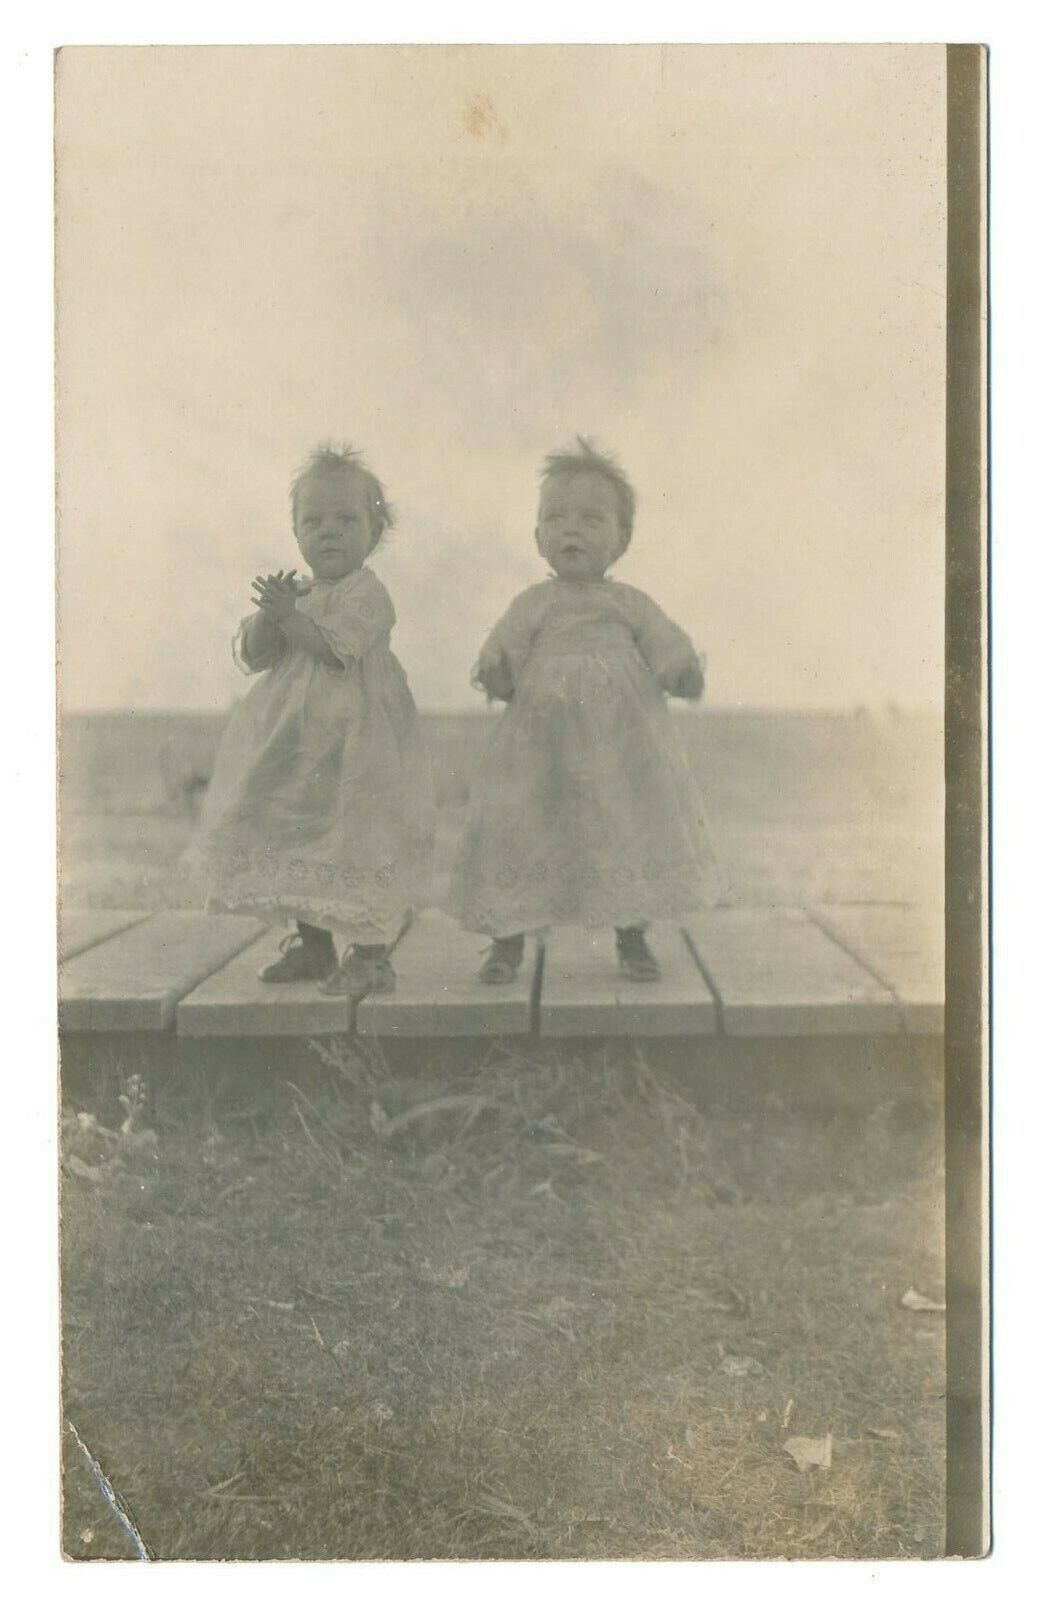 Twins Child's Arms Not Fully Formed Birth Defect Photo Postcard Children RPPC